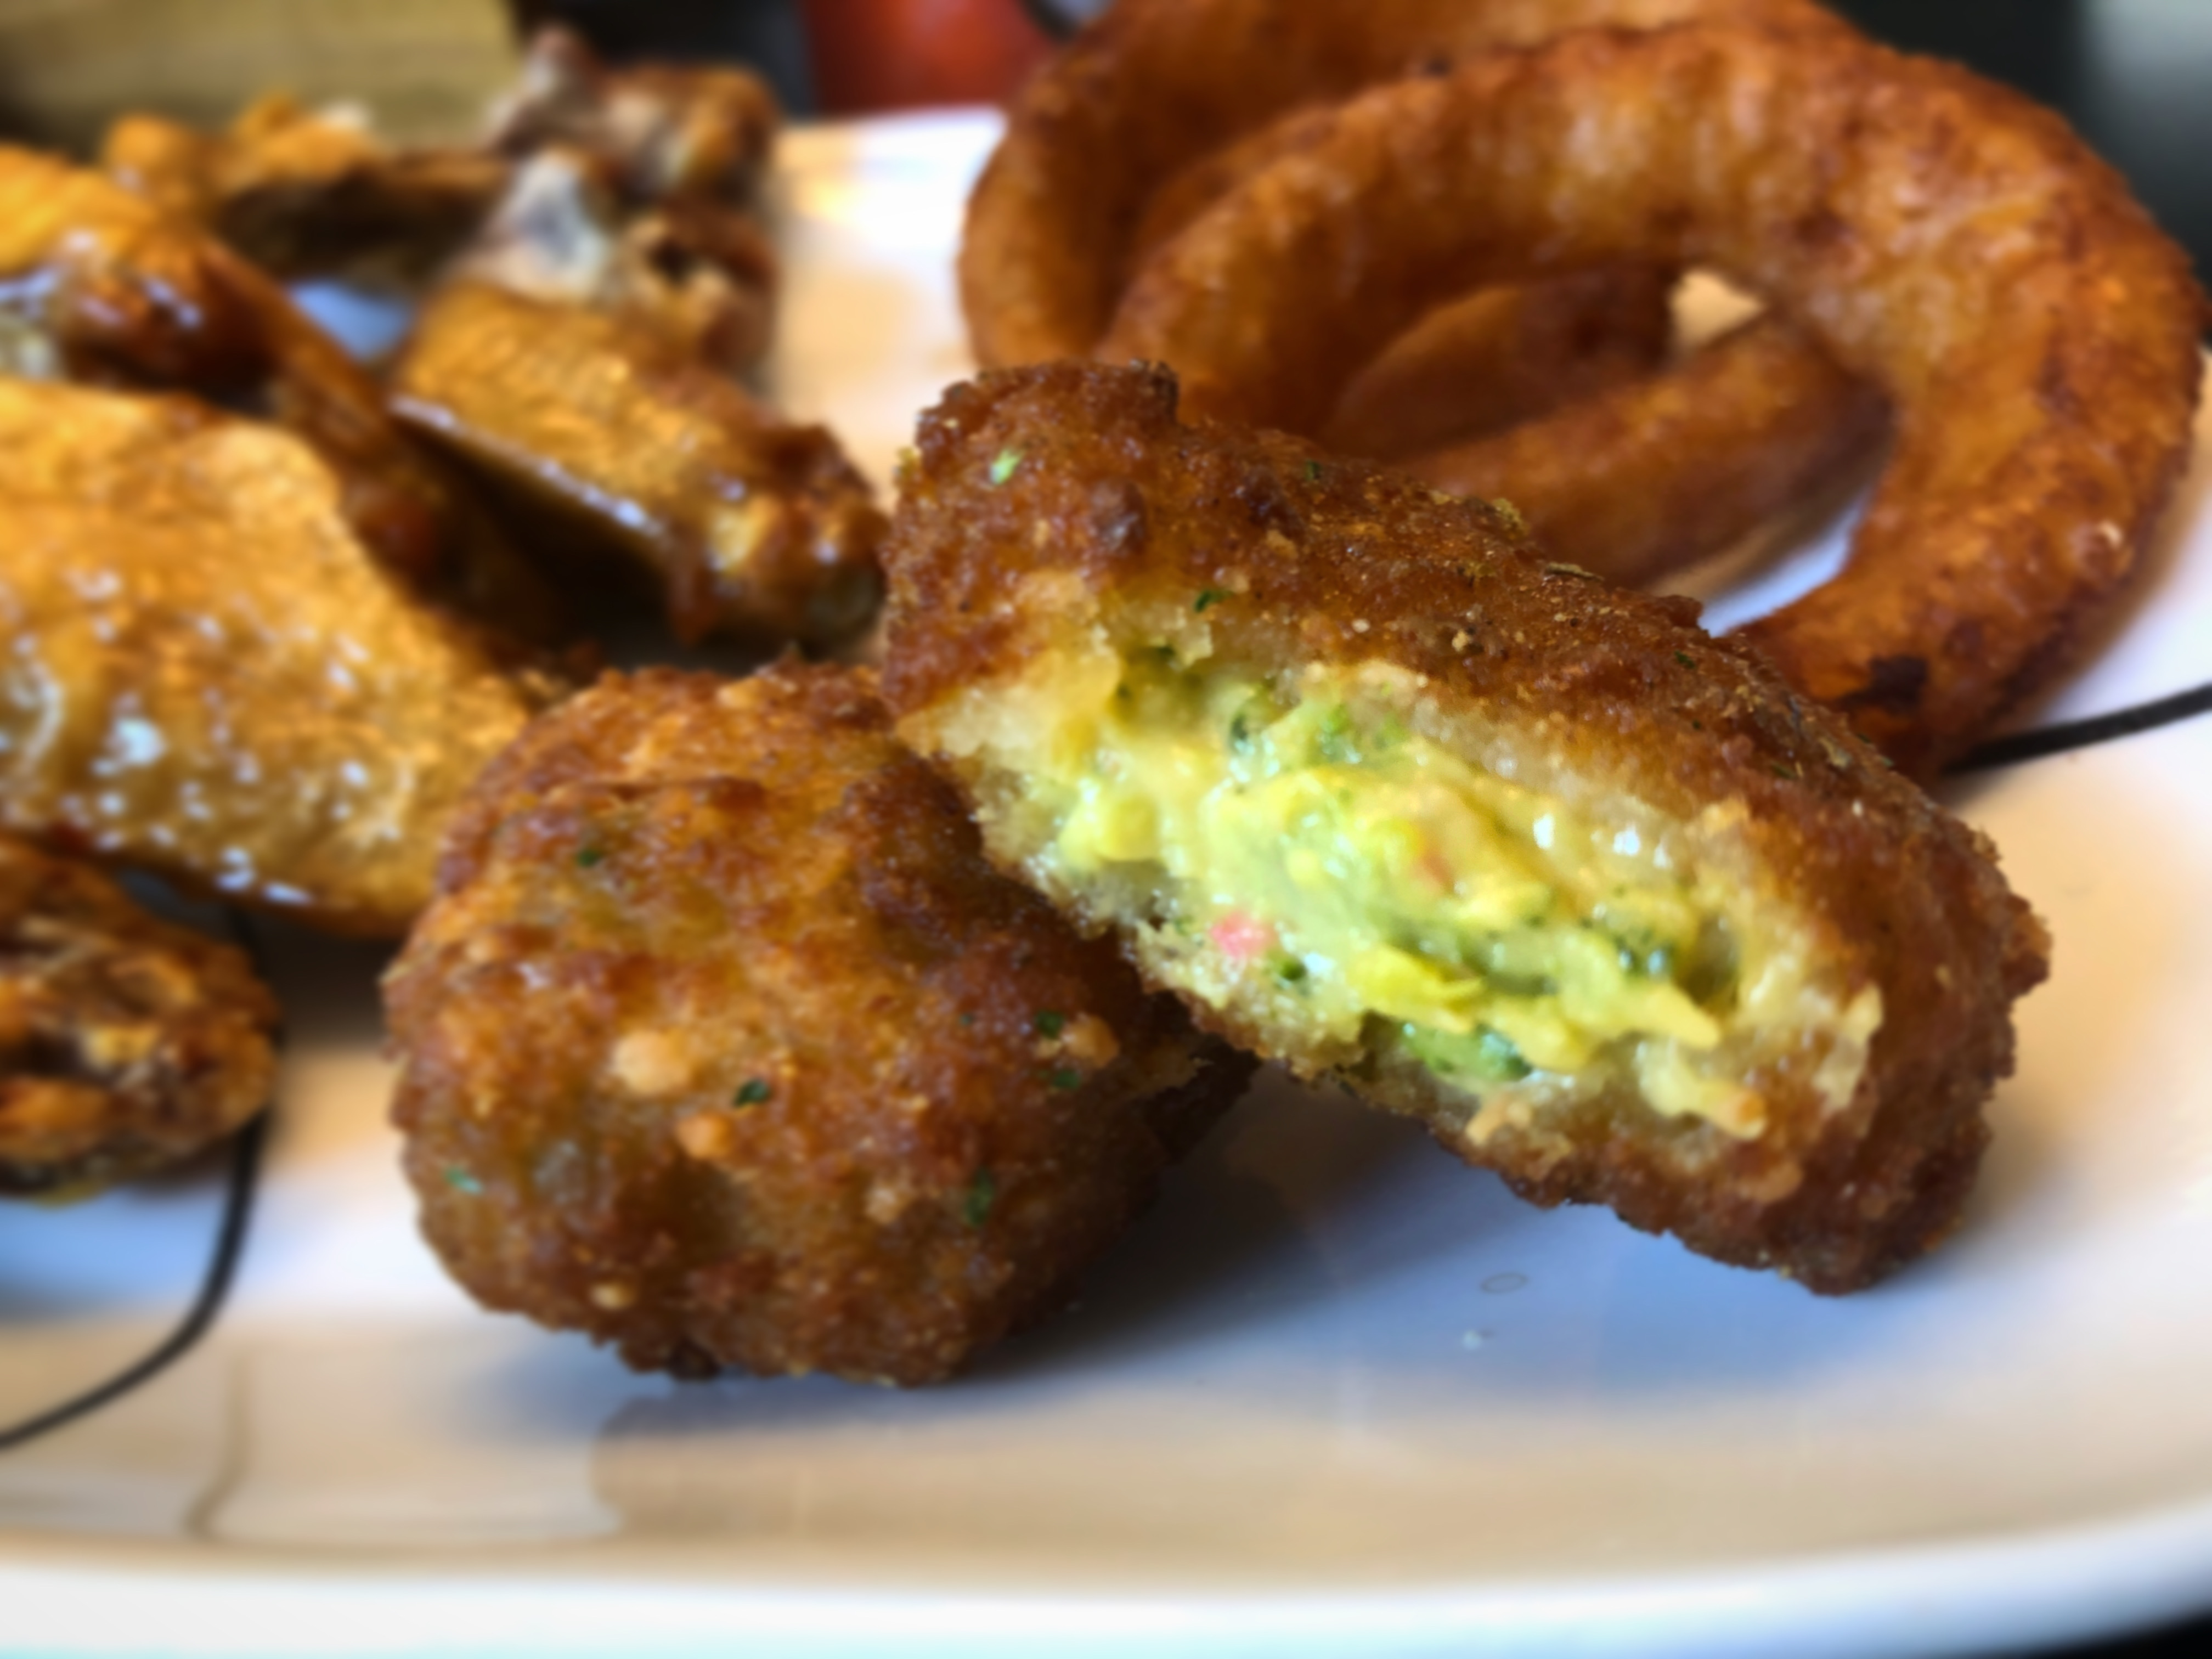 Broccoli bites from Rumbergers are on a plate with wings. The broccoli bite is cut in half to see the cheesy inside. Photo by Alyssa Buckley.